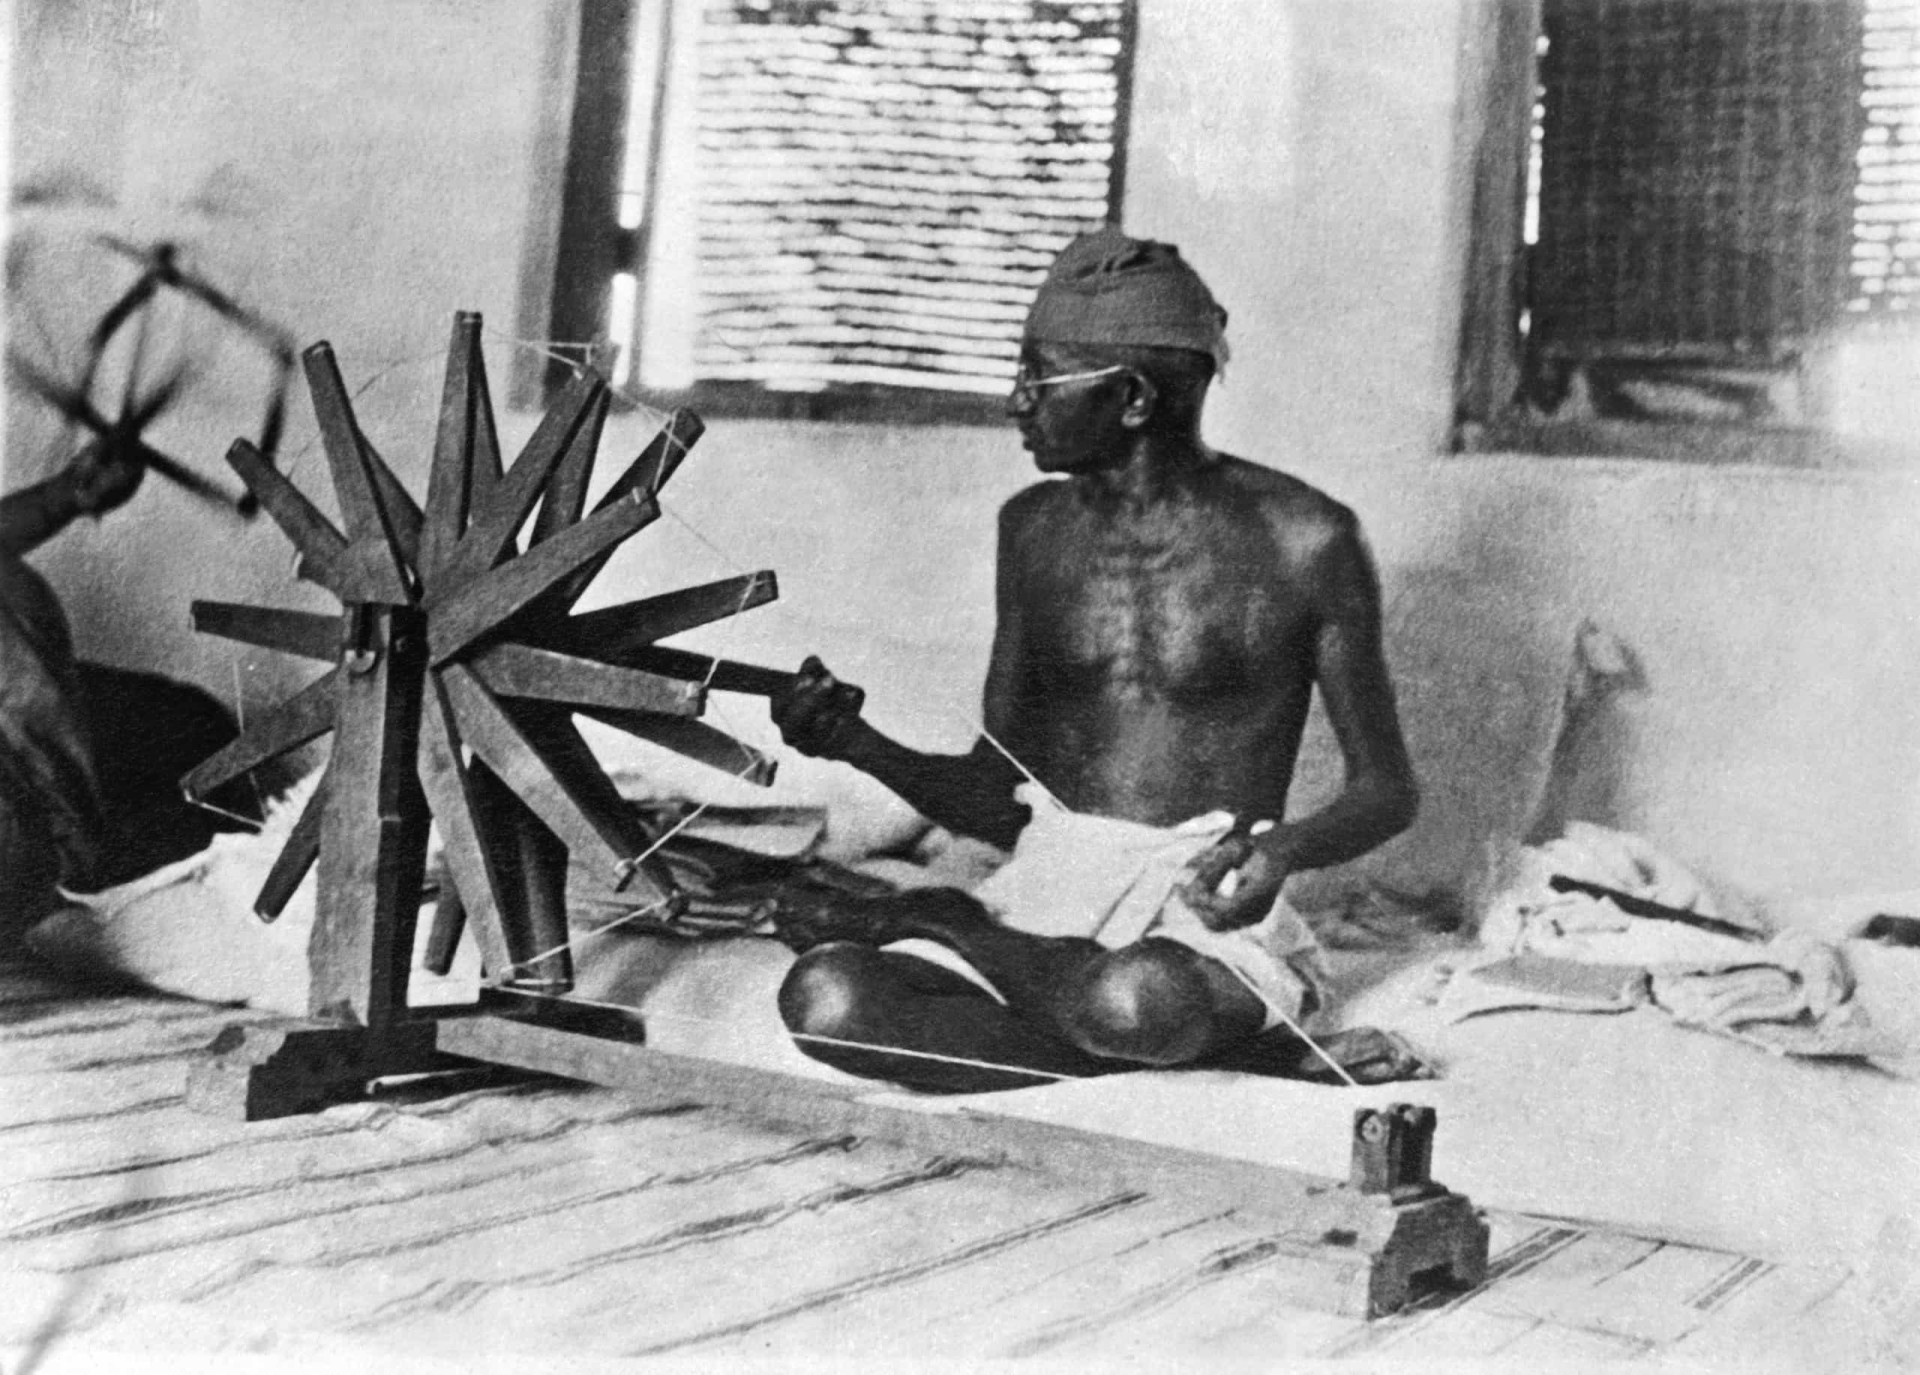 <p>Gandhi also expanded his nonviolent non-co-operation platform to include the "swadeshi" policy—the boycott of foreign-made goods, especially those from Britain. He urged Indian men and women, rich or poor, to spend time each day spinning khadi (homespun cotton) in support of the independence movement. The image of Gandhi making kadhi, by using a spinning wheel called a chakra, came to symbolize the man and the movement. </p><p>You may also like:<a href="https://www.starsinsider.com/n/412861?utm_source=msn.com&utm_medium=display&utm_campaign=referral_description&utm_content=447666v5en-us"> 30 of the best films directed by women</a></p>